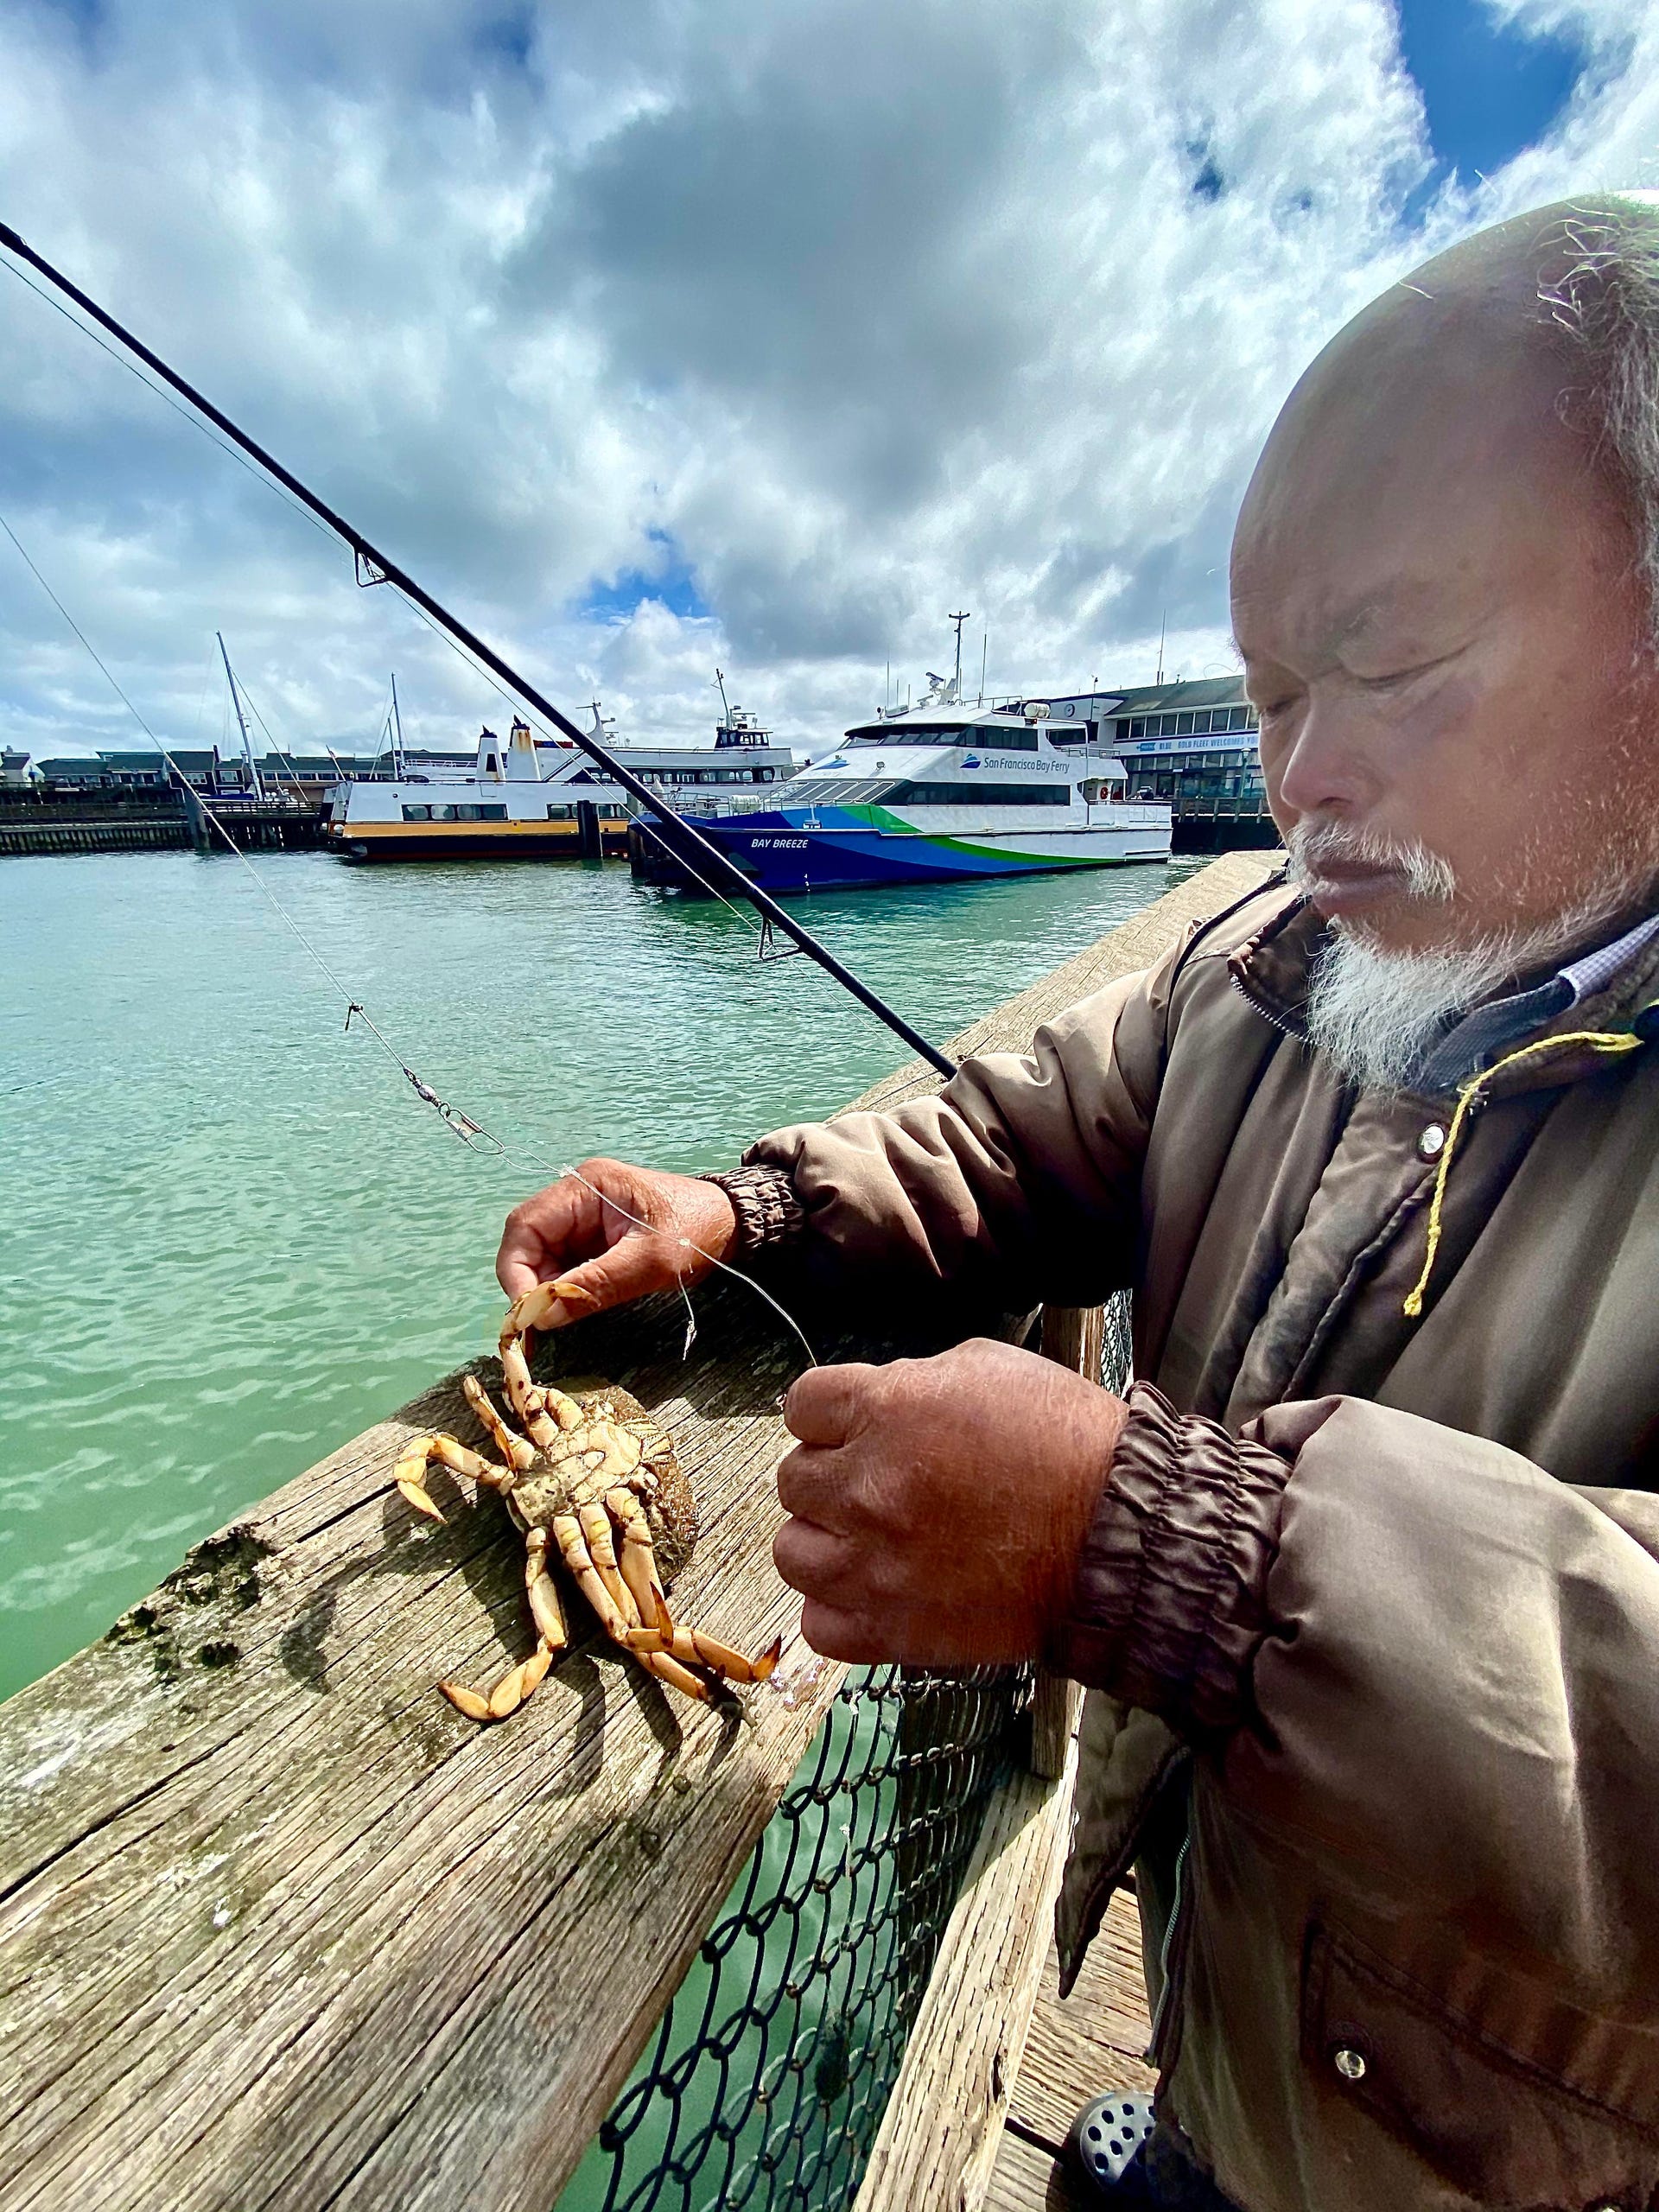 Fisherman catches a crab in San Francisco. Shot on iPhone 11 Pro.